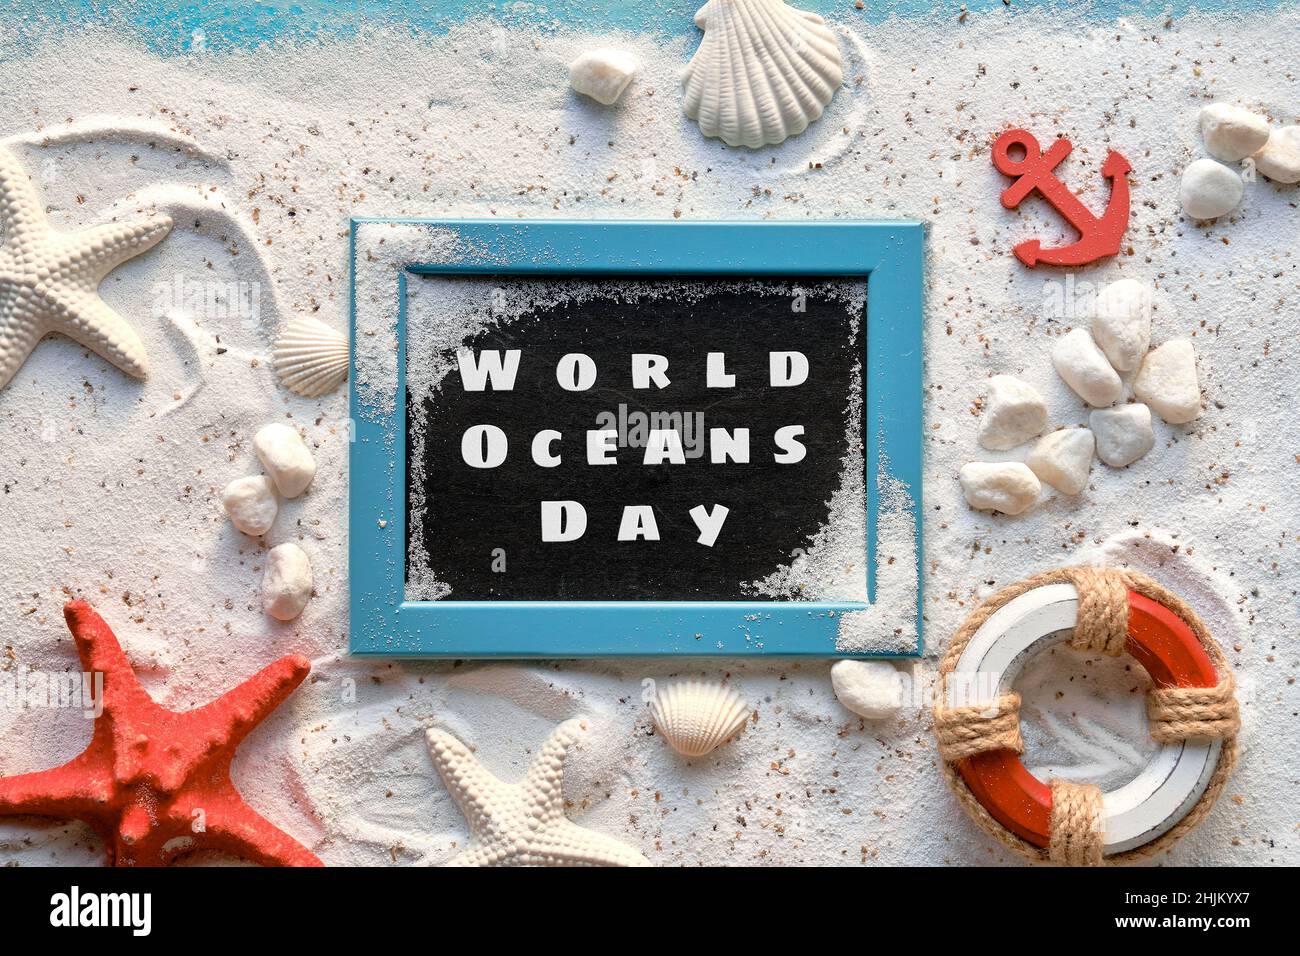 World Oceans Day text. Background with white sand on turquoise blue. Shells, red starfish, anchor. Stock Photo